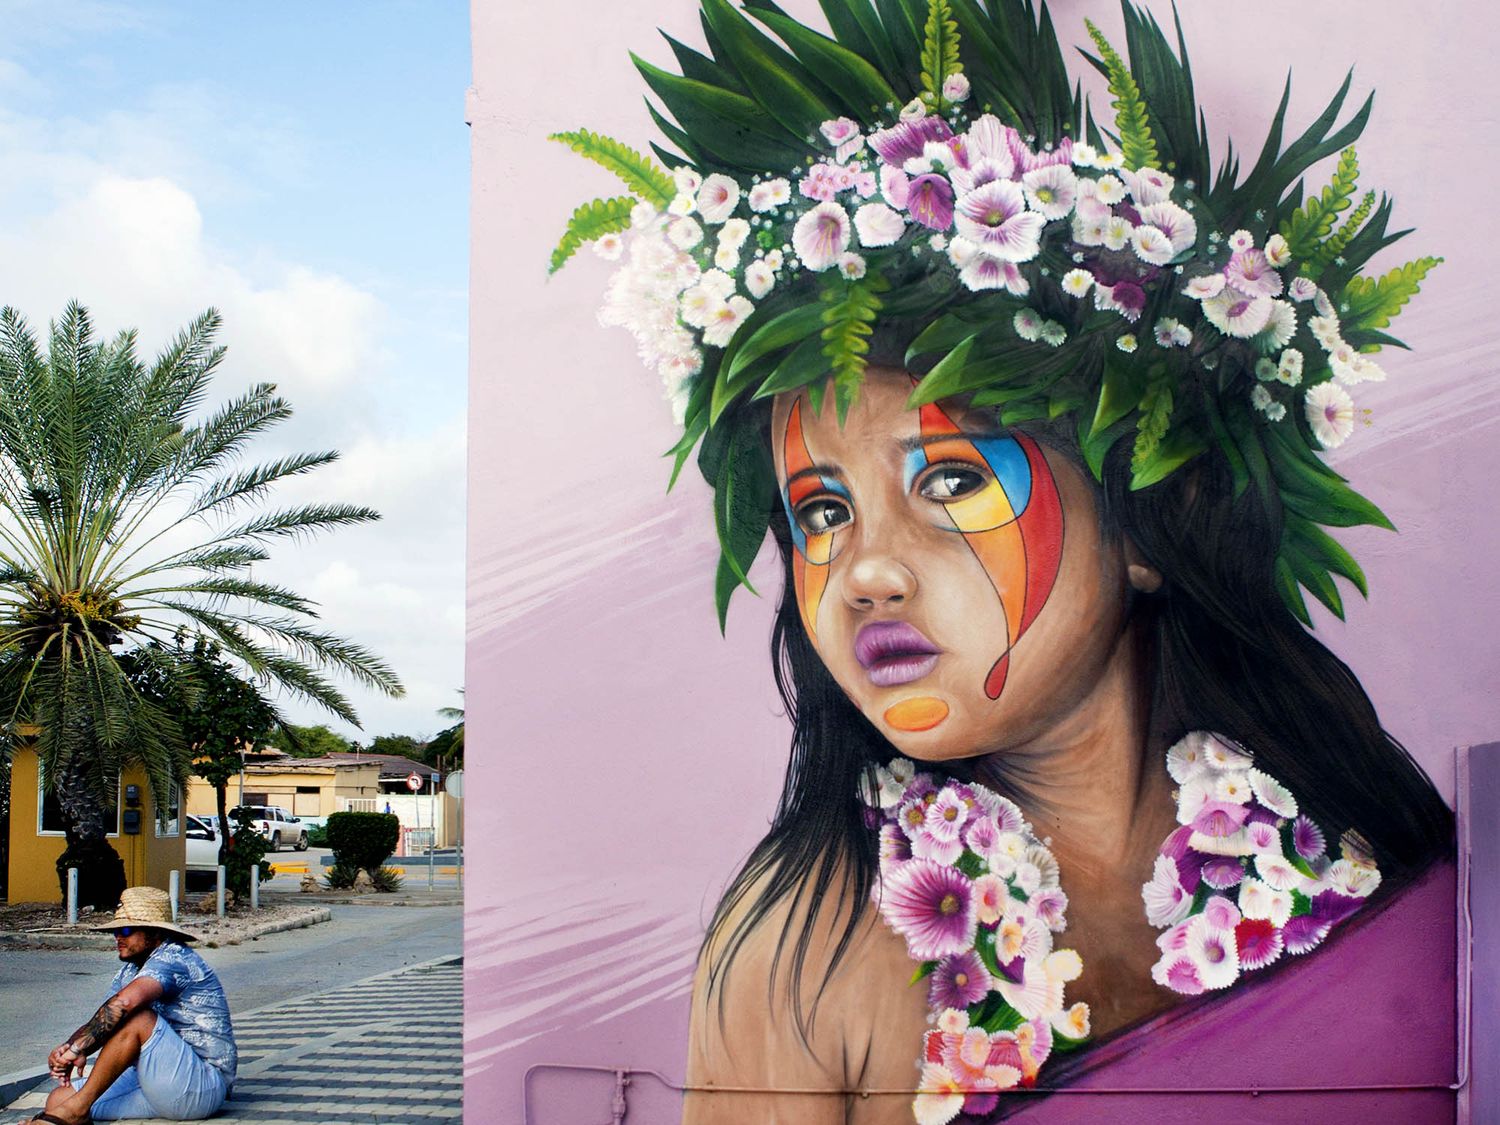 Through this portrait of a little girl named “Leilana” done for the Street Colors Bonaire project, the artist Tymon de Laat has given birth to one of the best murals of 2021 (©Tymon De Laat).